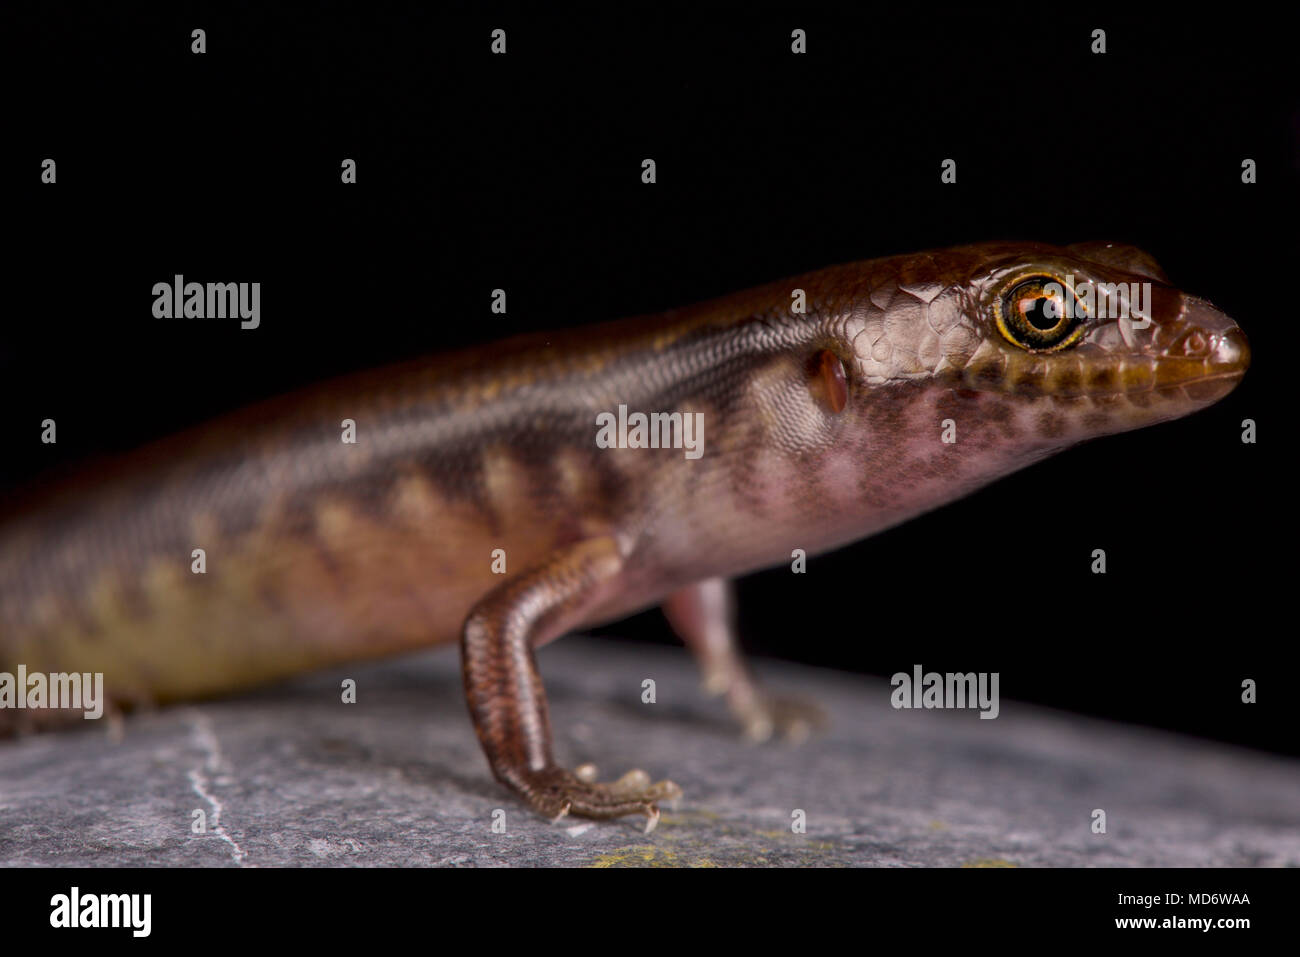 The New Caledonian night skink (Kanakysaurus viviparus) is a recently discovered and described skink species from New Caledonia. They are nocturnal an Stock Photo